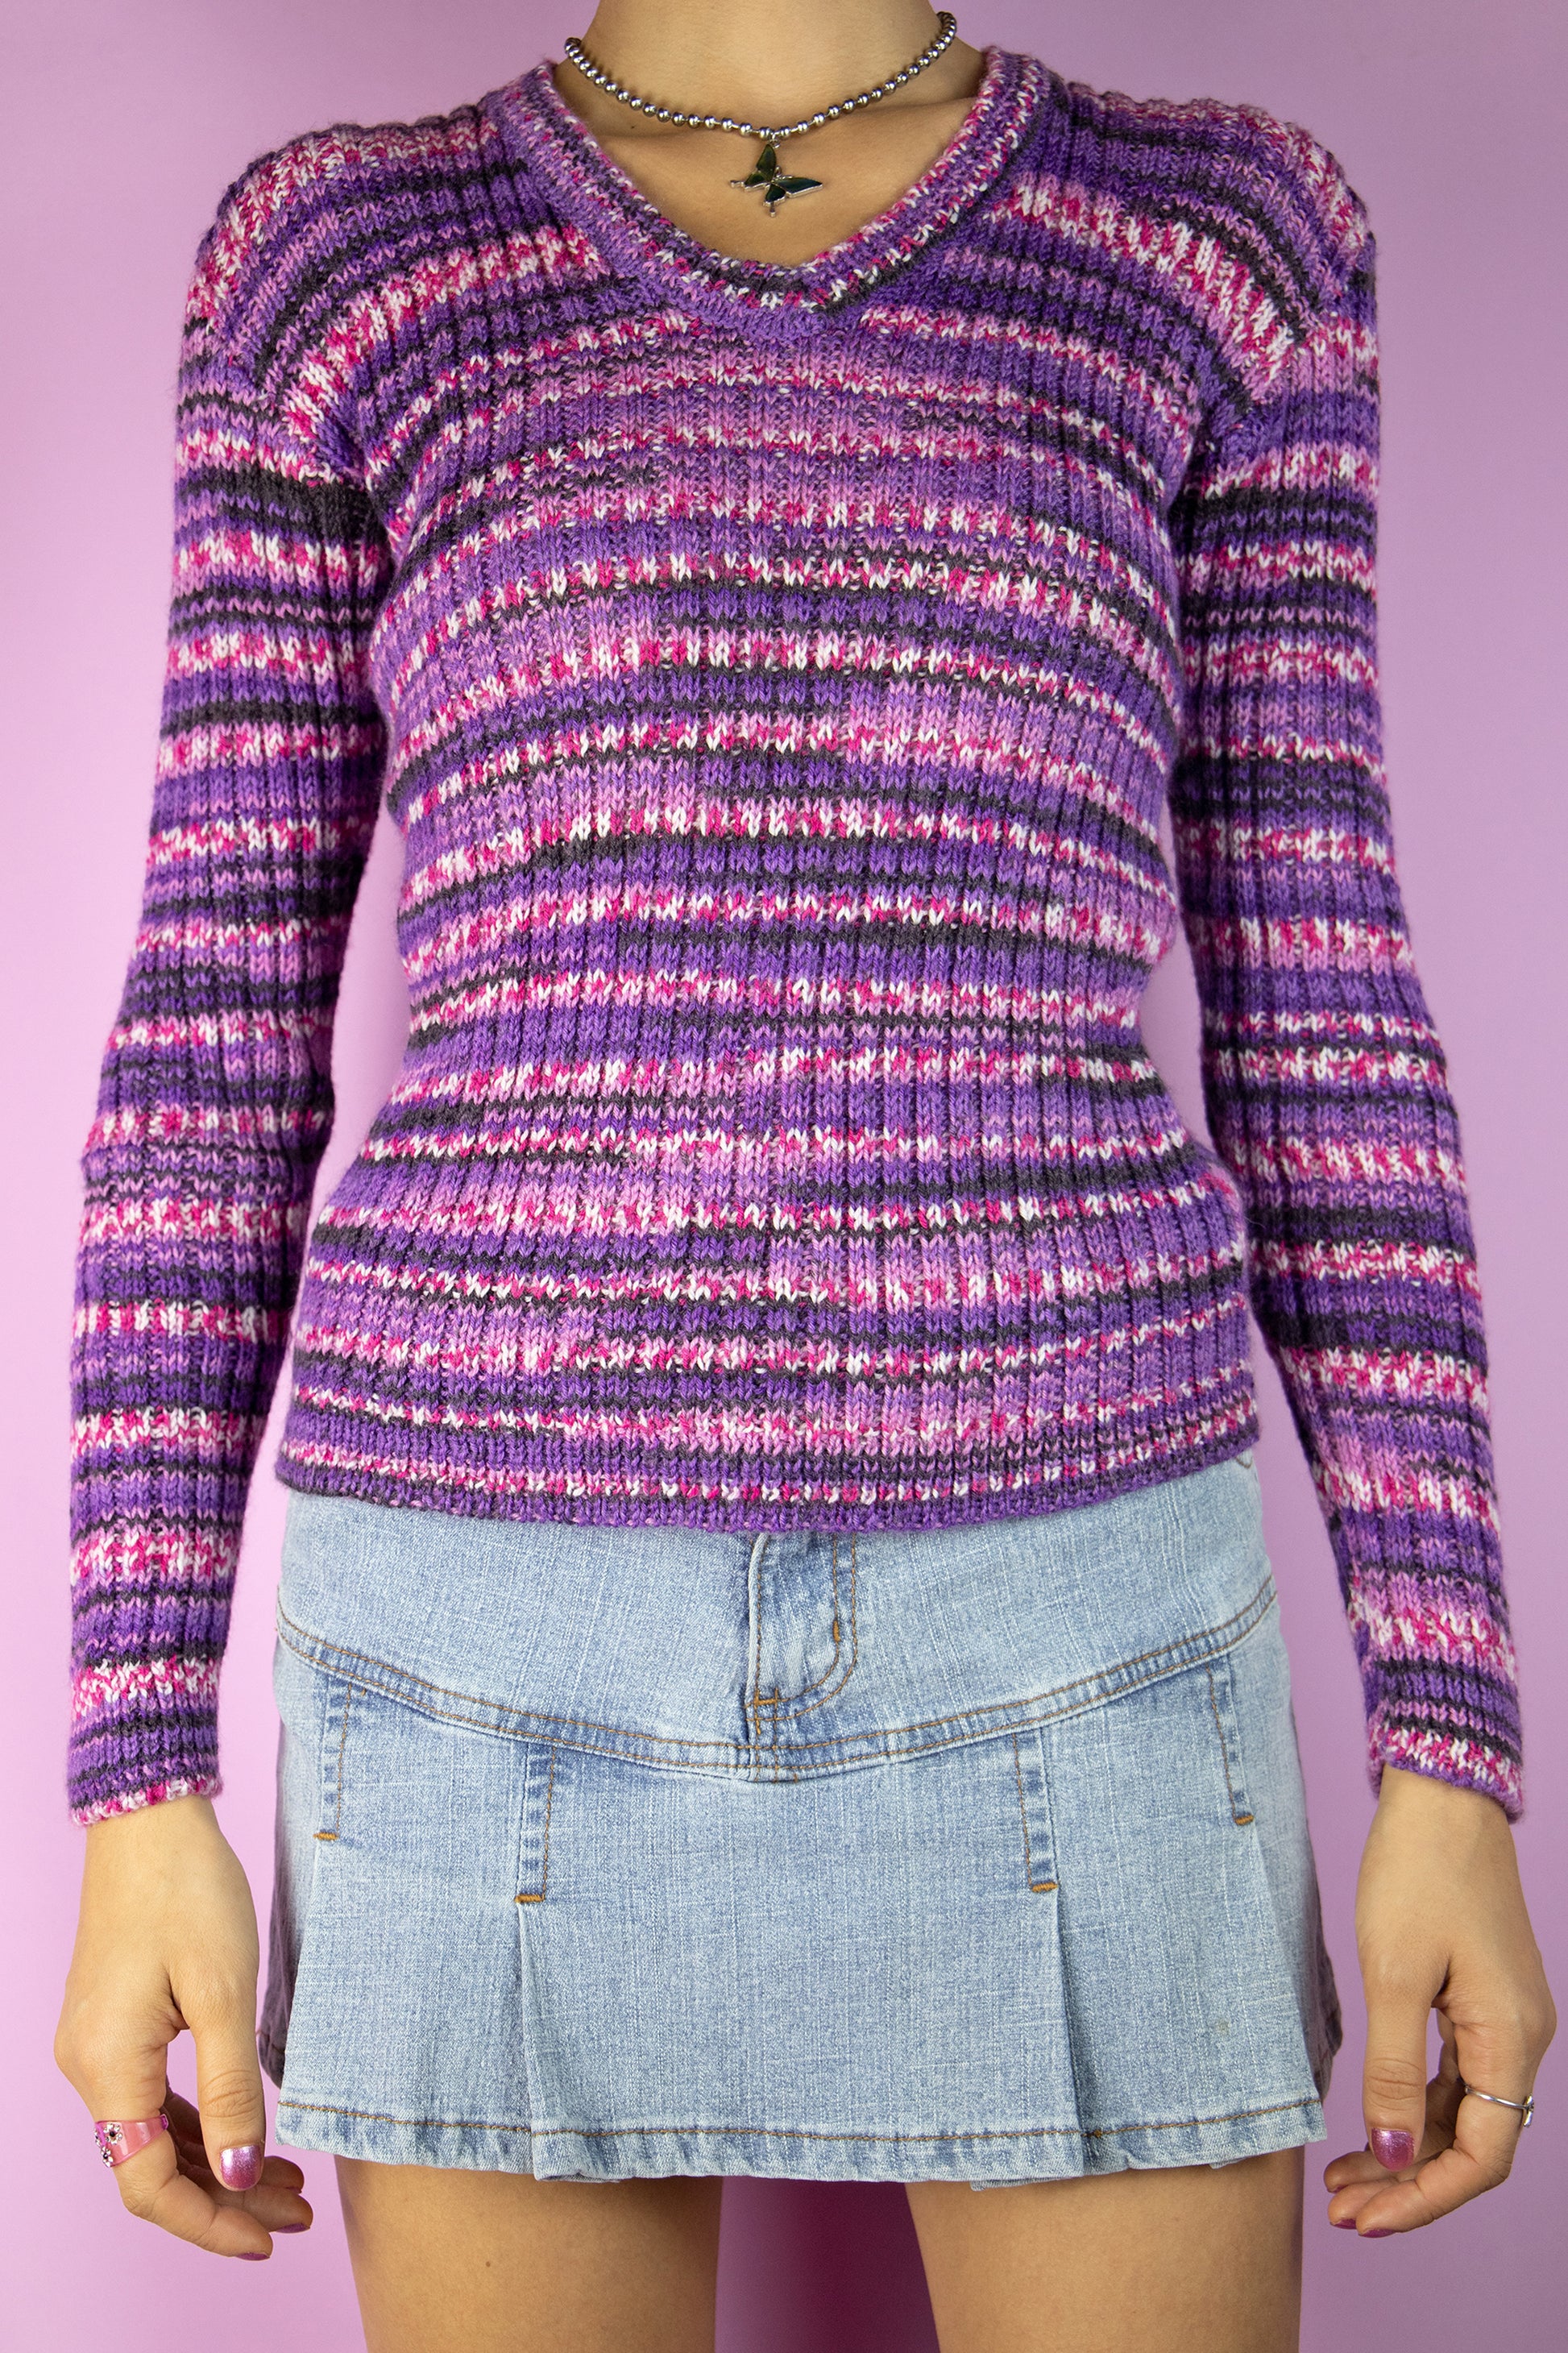 The Vintage 90's Purple Striped Ribbed Sweater is a super cute cyber knit pullover with ribbed details and pink, lilac, and purple stripes, showcasing the iconic style of the 1990s.